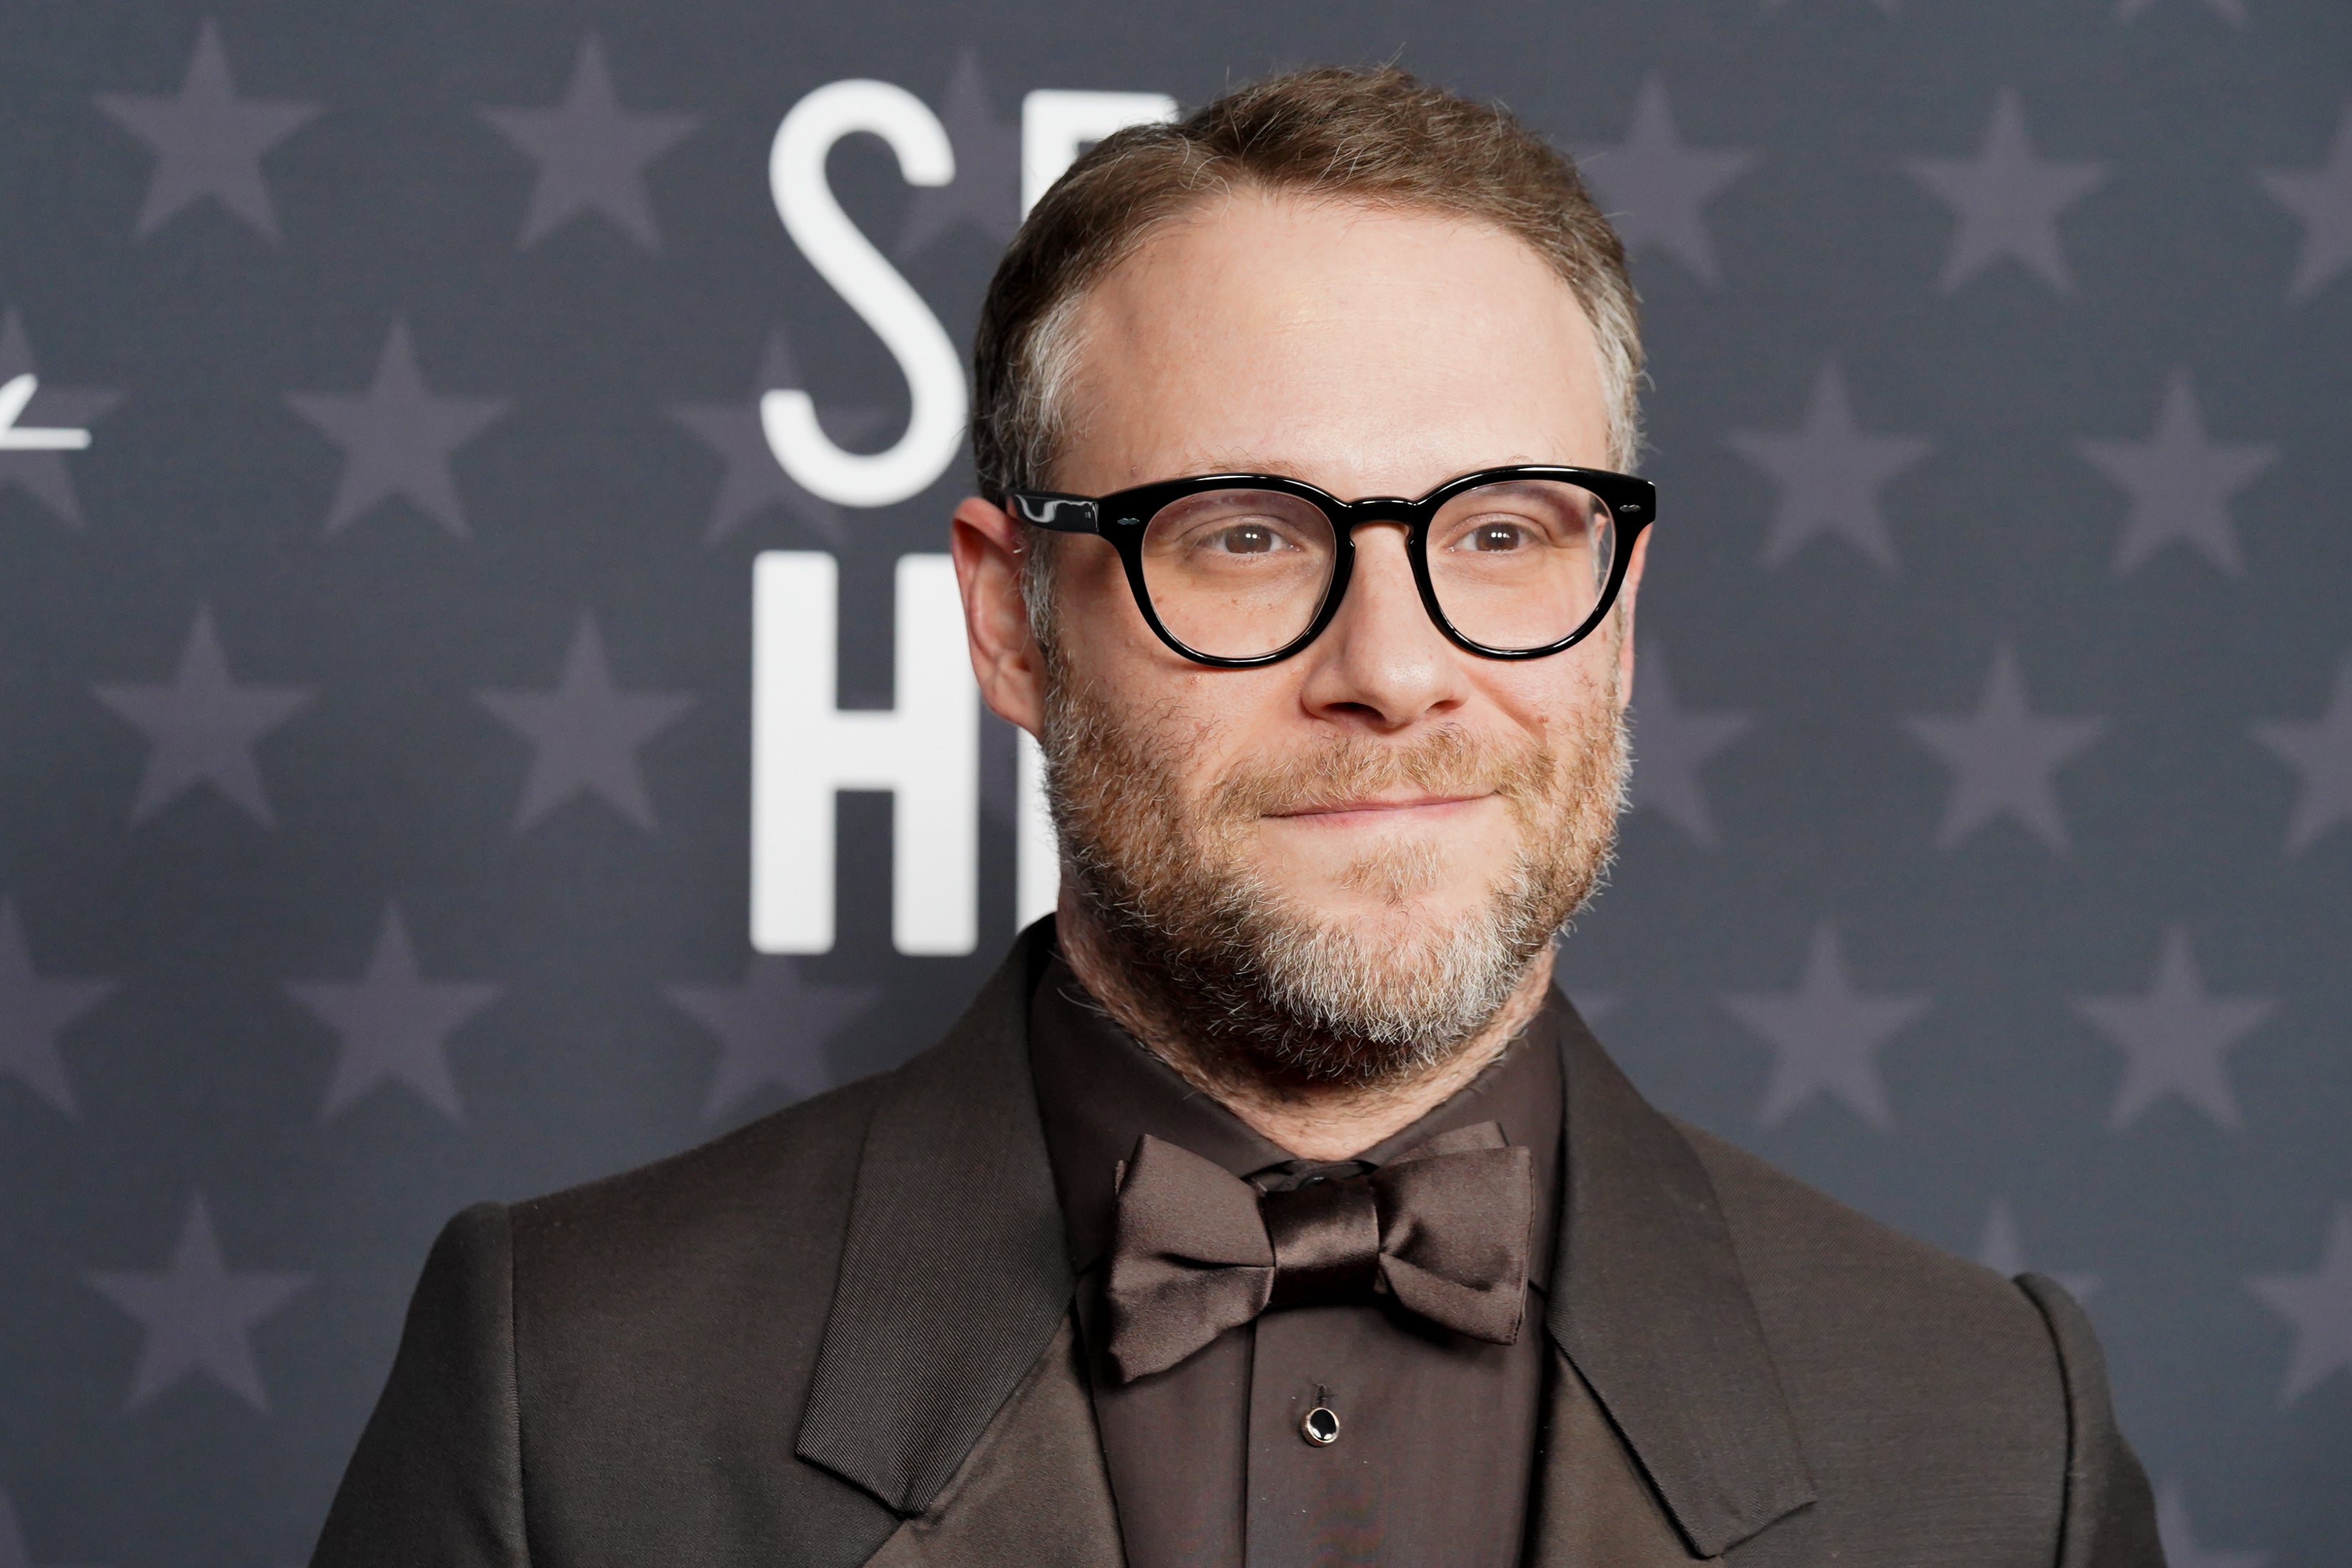 Rogen admitted he is still impacted by negative reviews